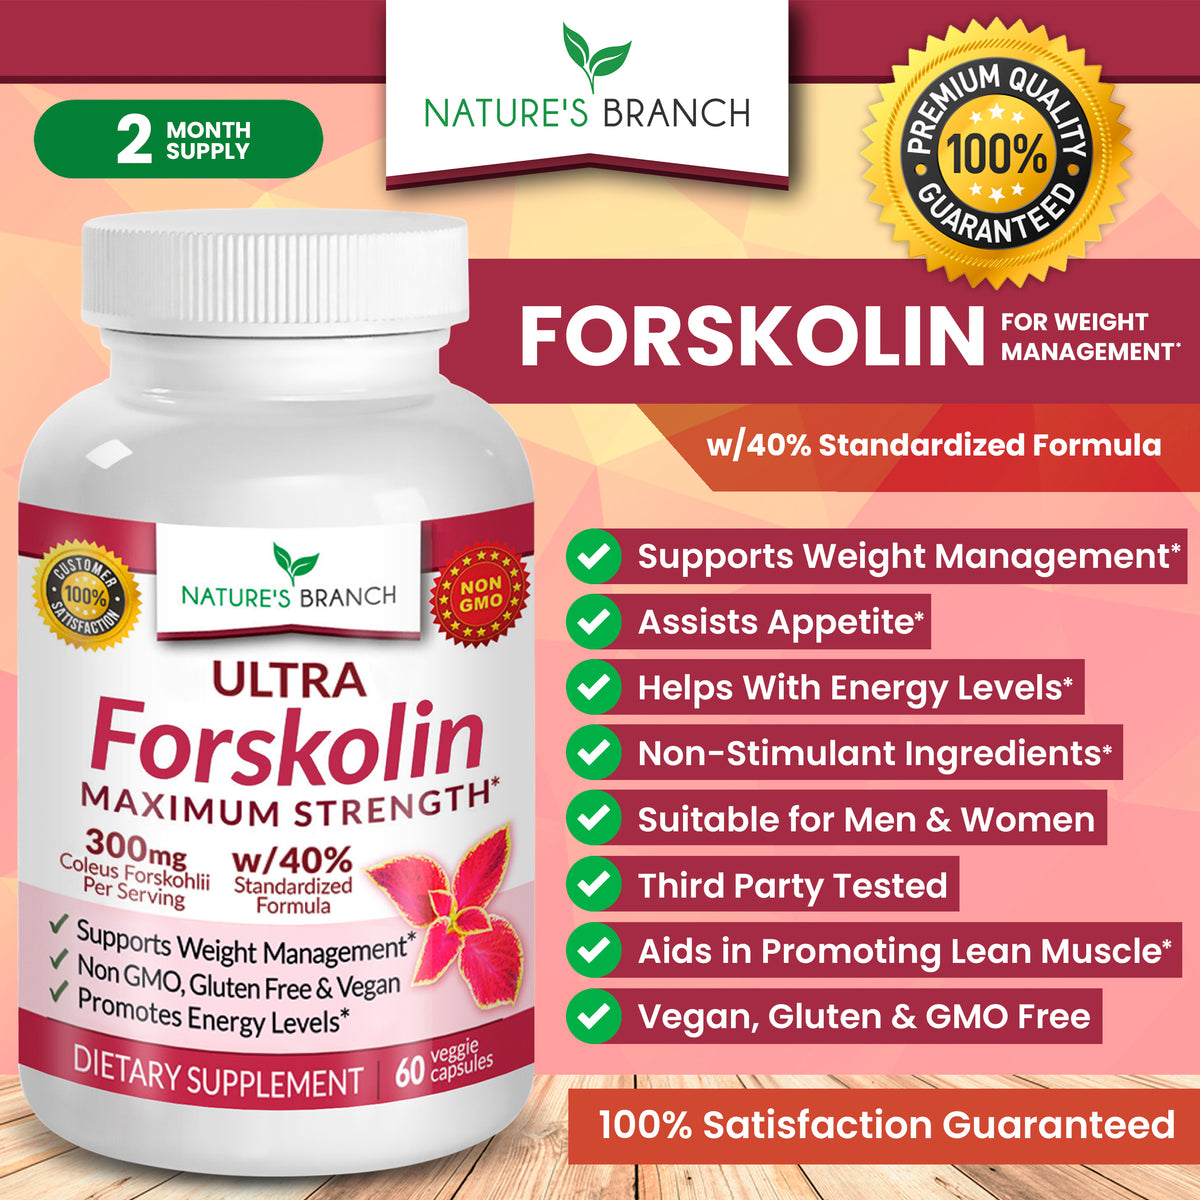 Nature&#39;s Branch forskoling bottle with bullet points showing the benefits